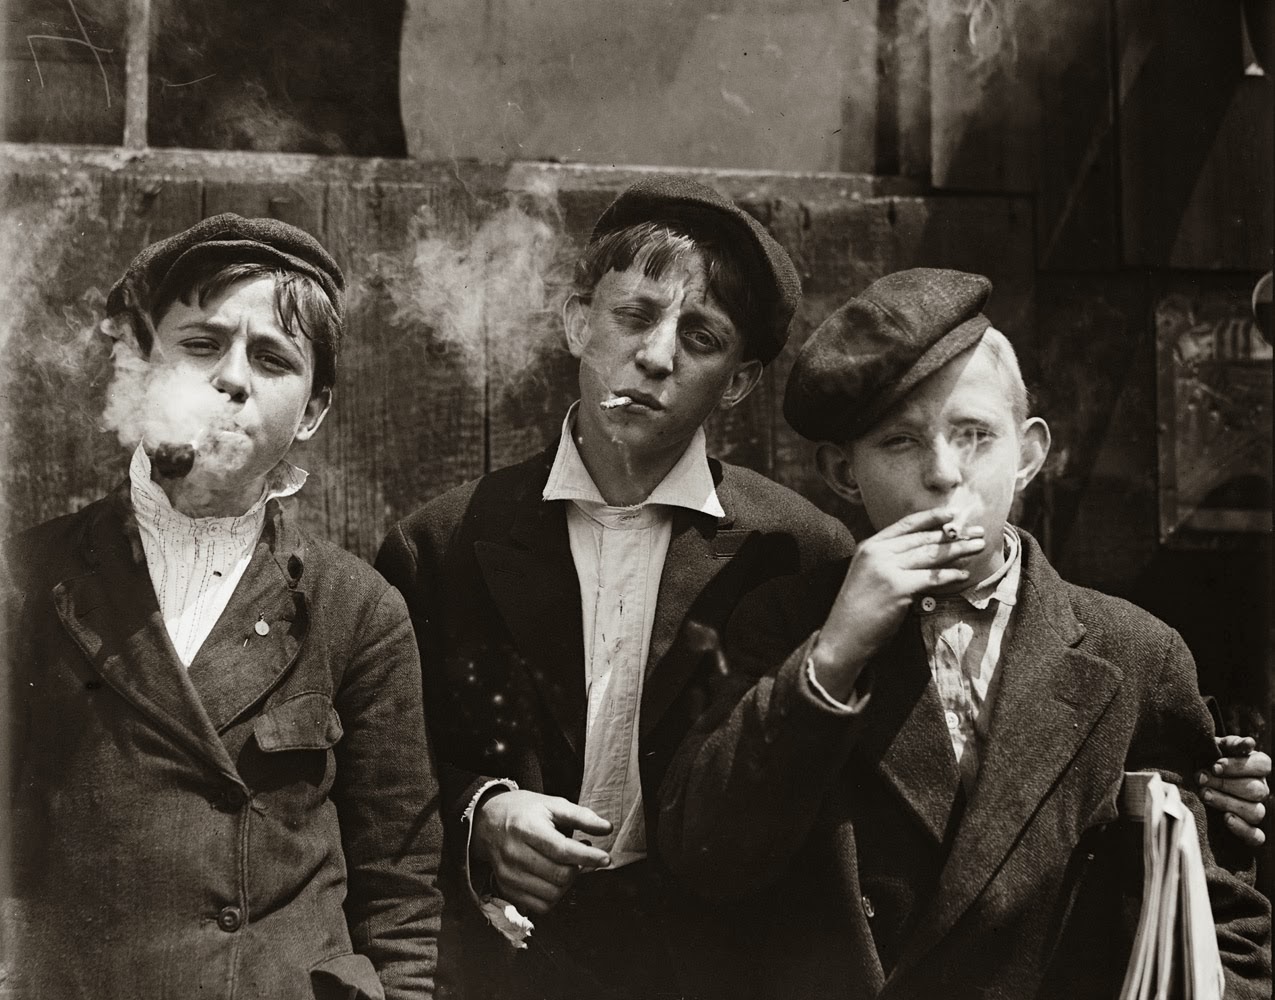 Newsies at Skeeter's Branch. They were all smoking. St. Louis, Missouri. 1910